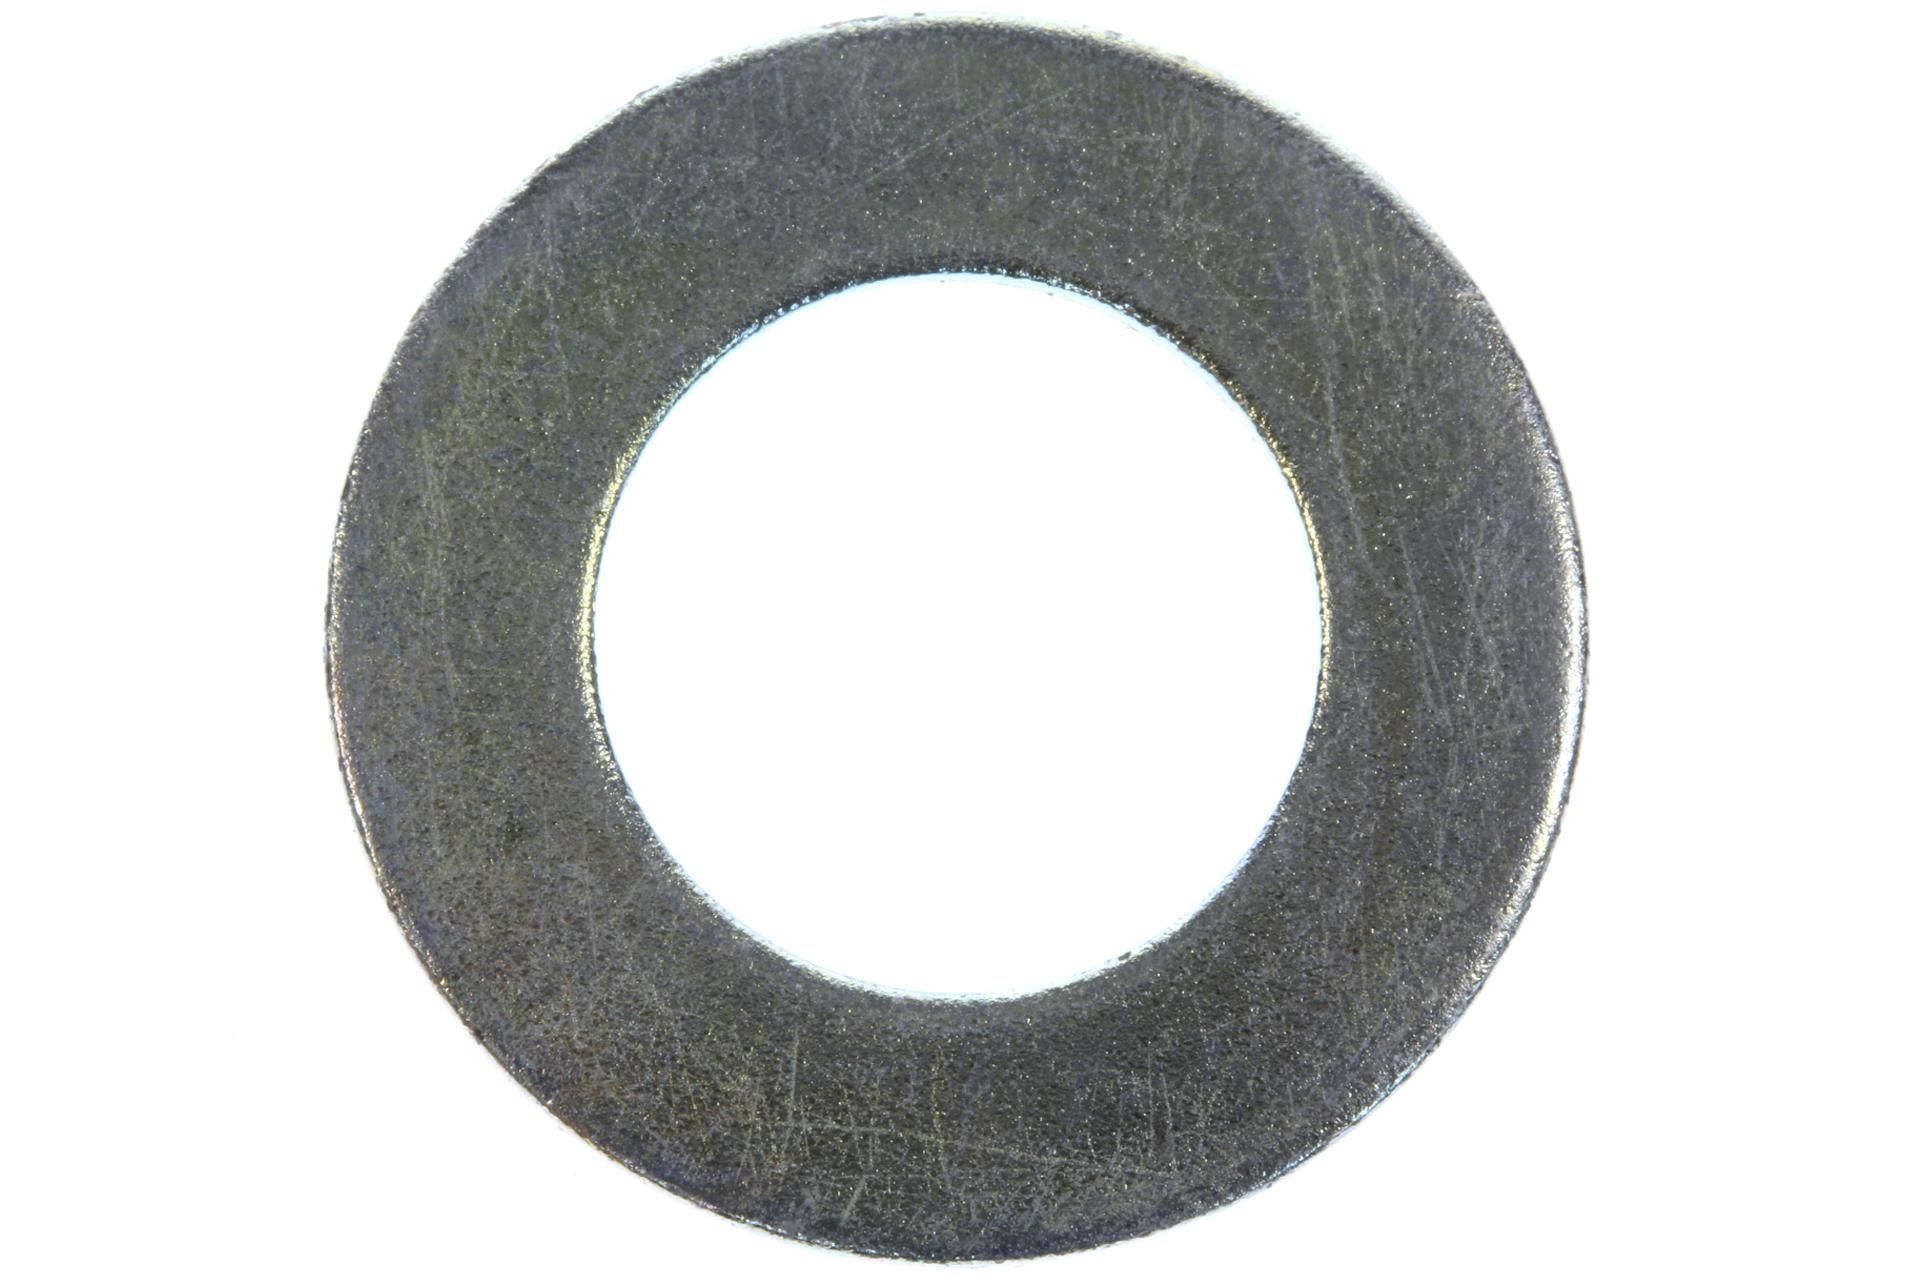 90201-132G5-00 Superseded by 90201-13013-00 - WASHER, PLATE